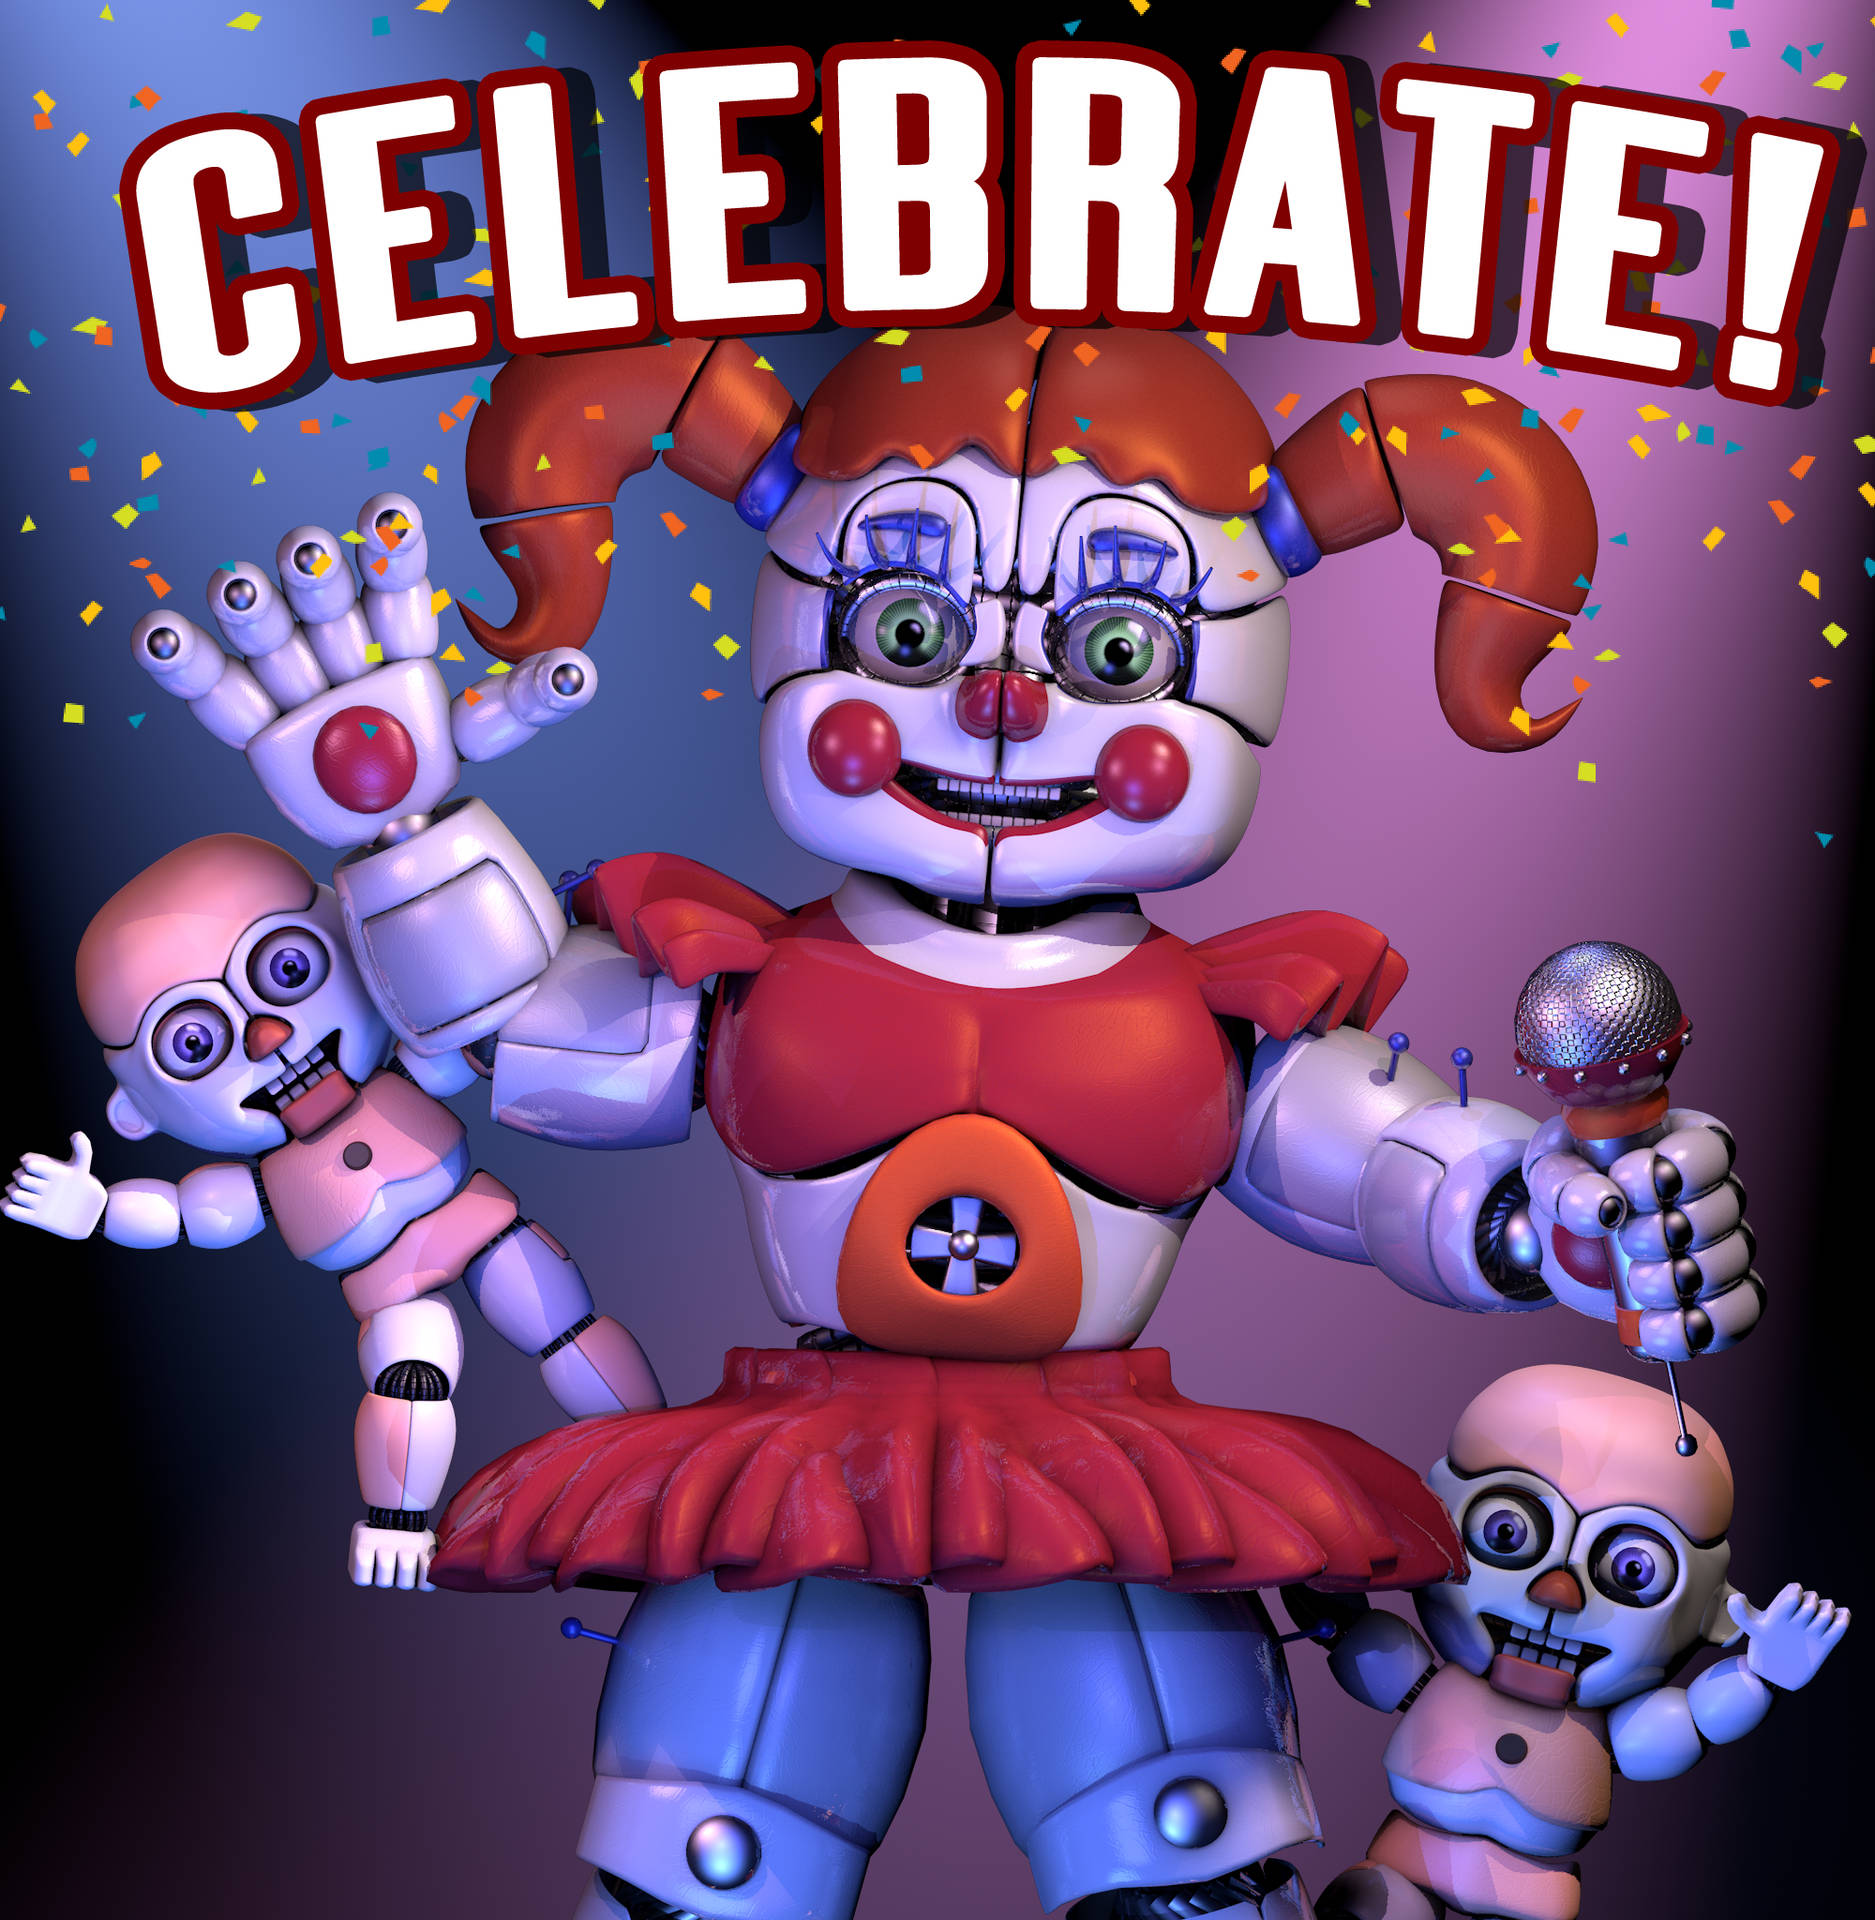 Exciting Circus Baby Celebration